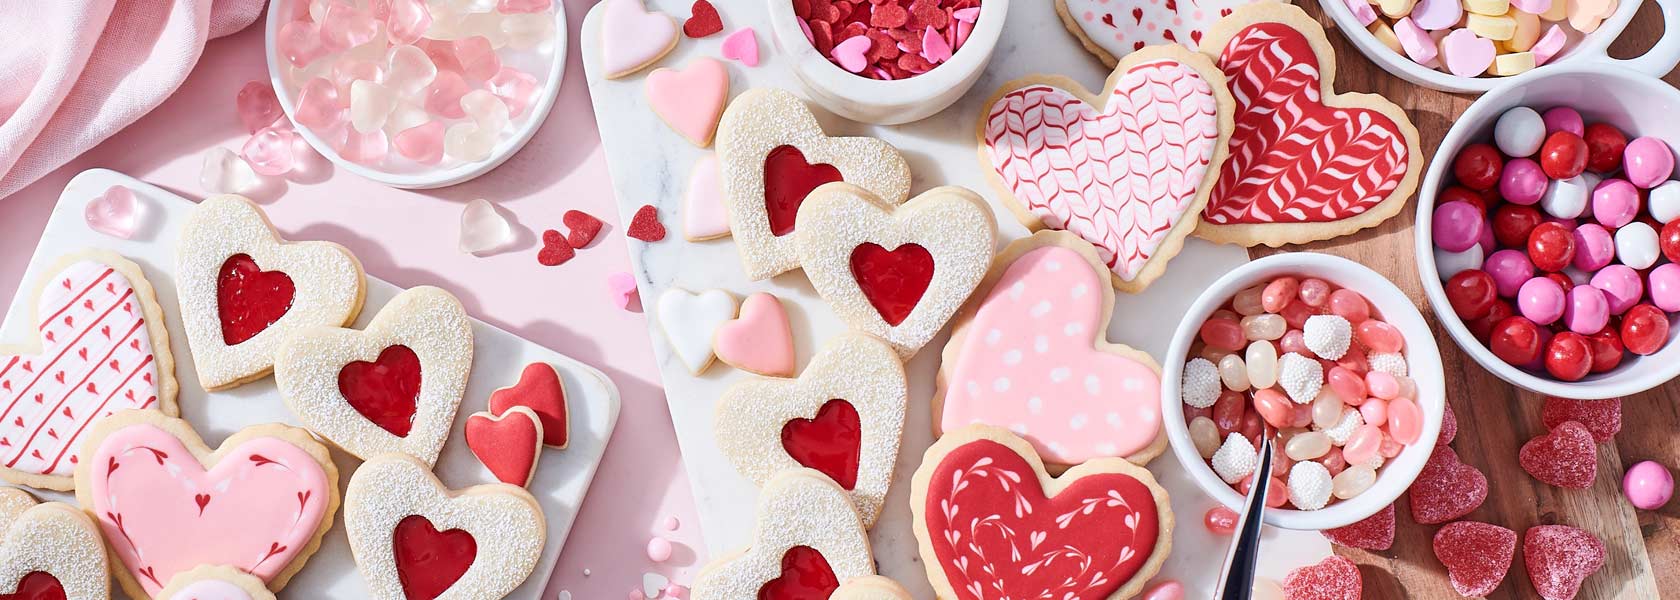 Heart shaped cookies in white, pink and red